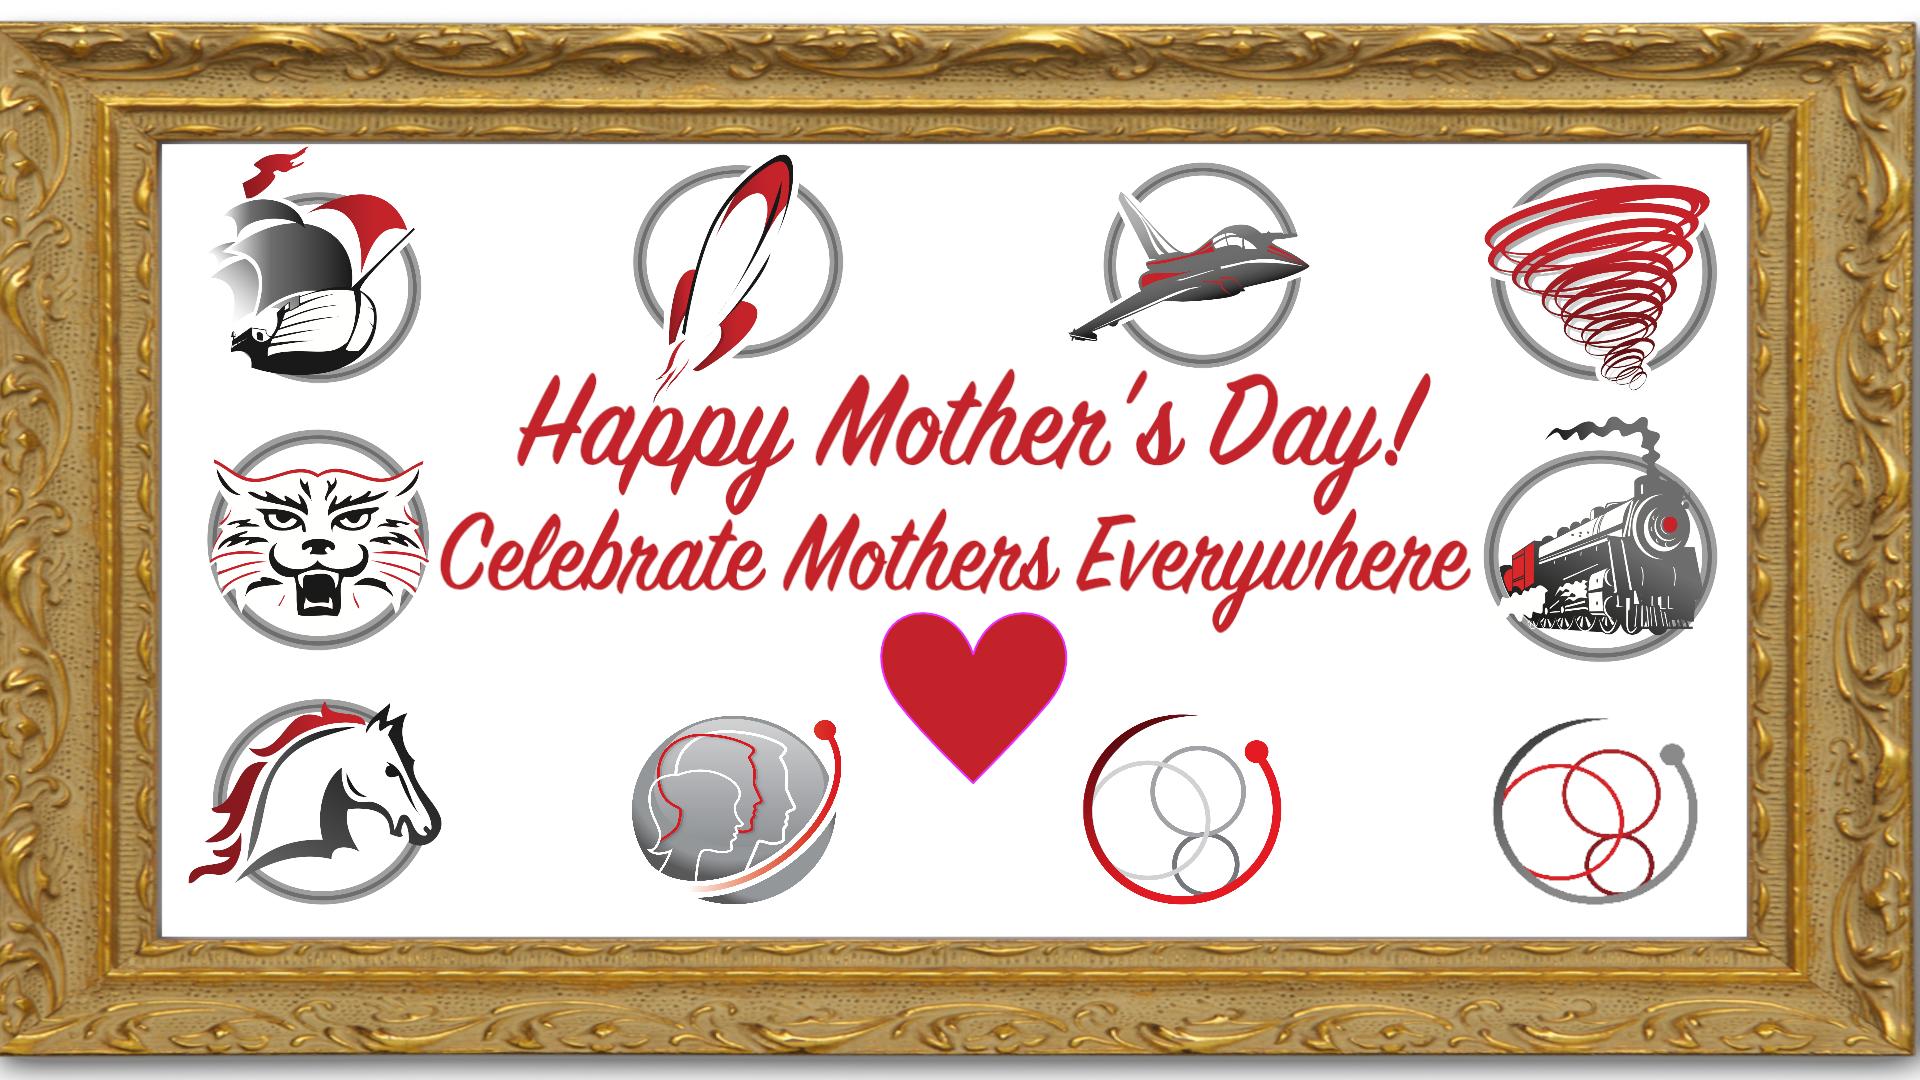 Happy Mother's Day! Celebrate Mothers Everywhere with PCSC school logos and a gold frame